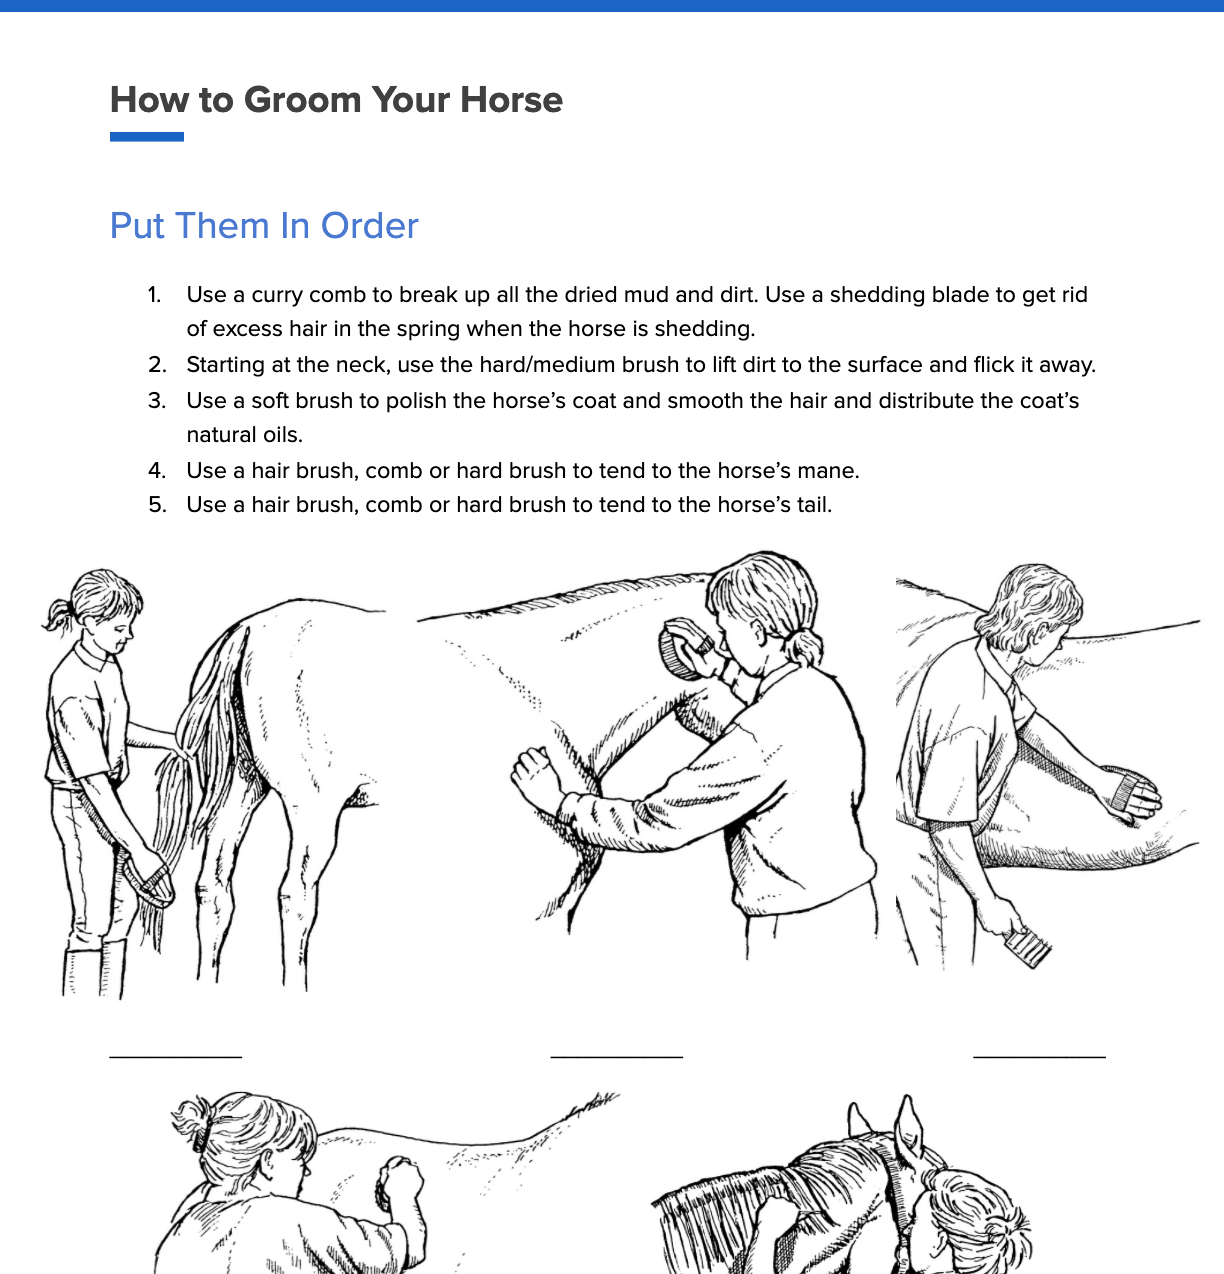 How to Groom Your Horse